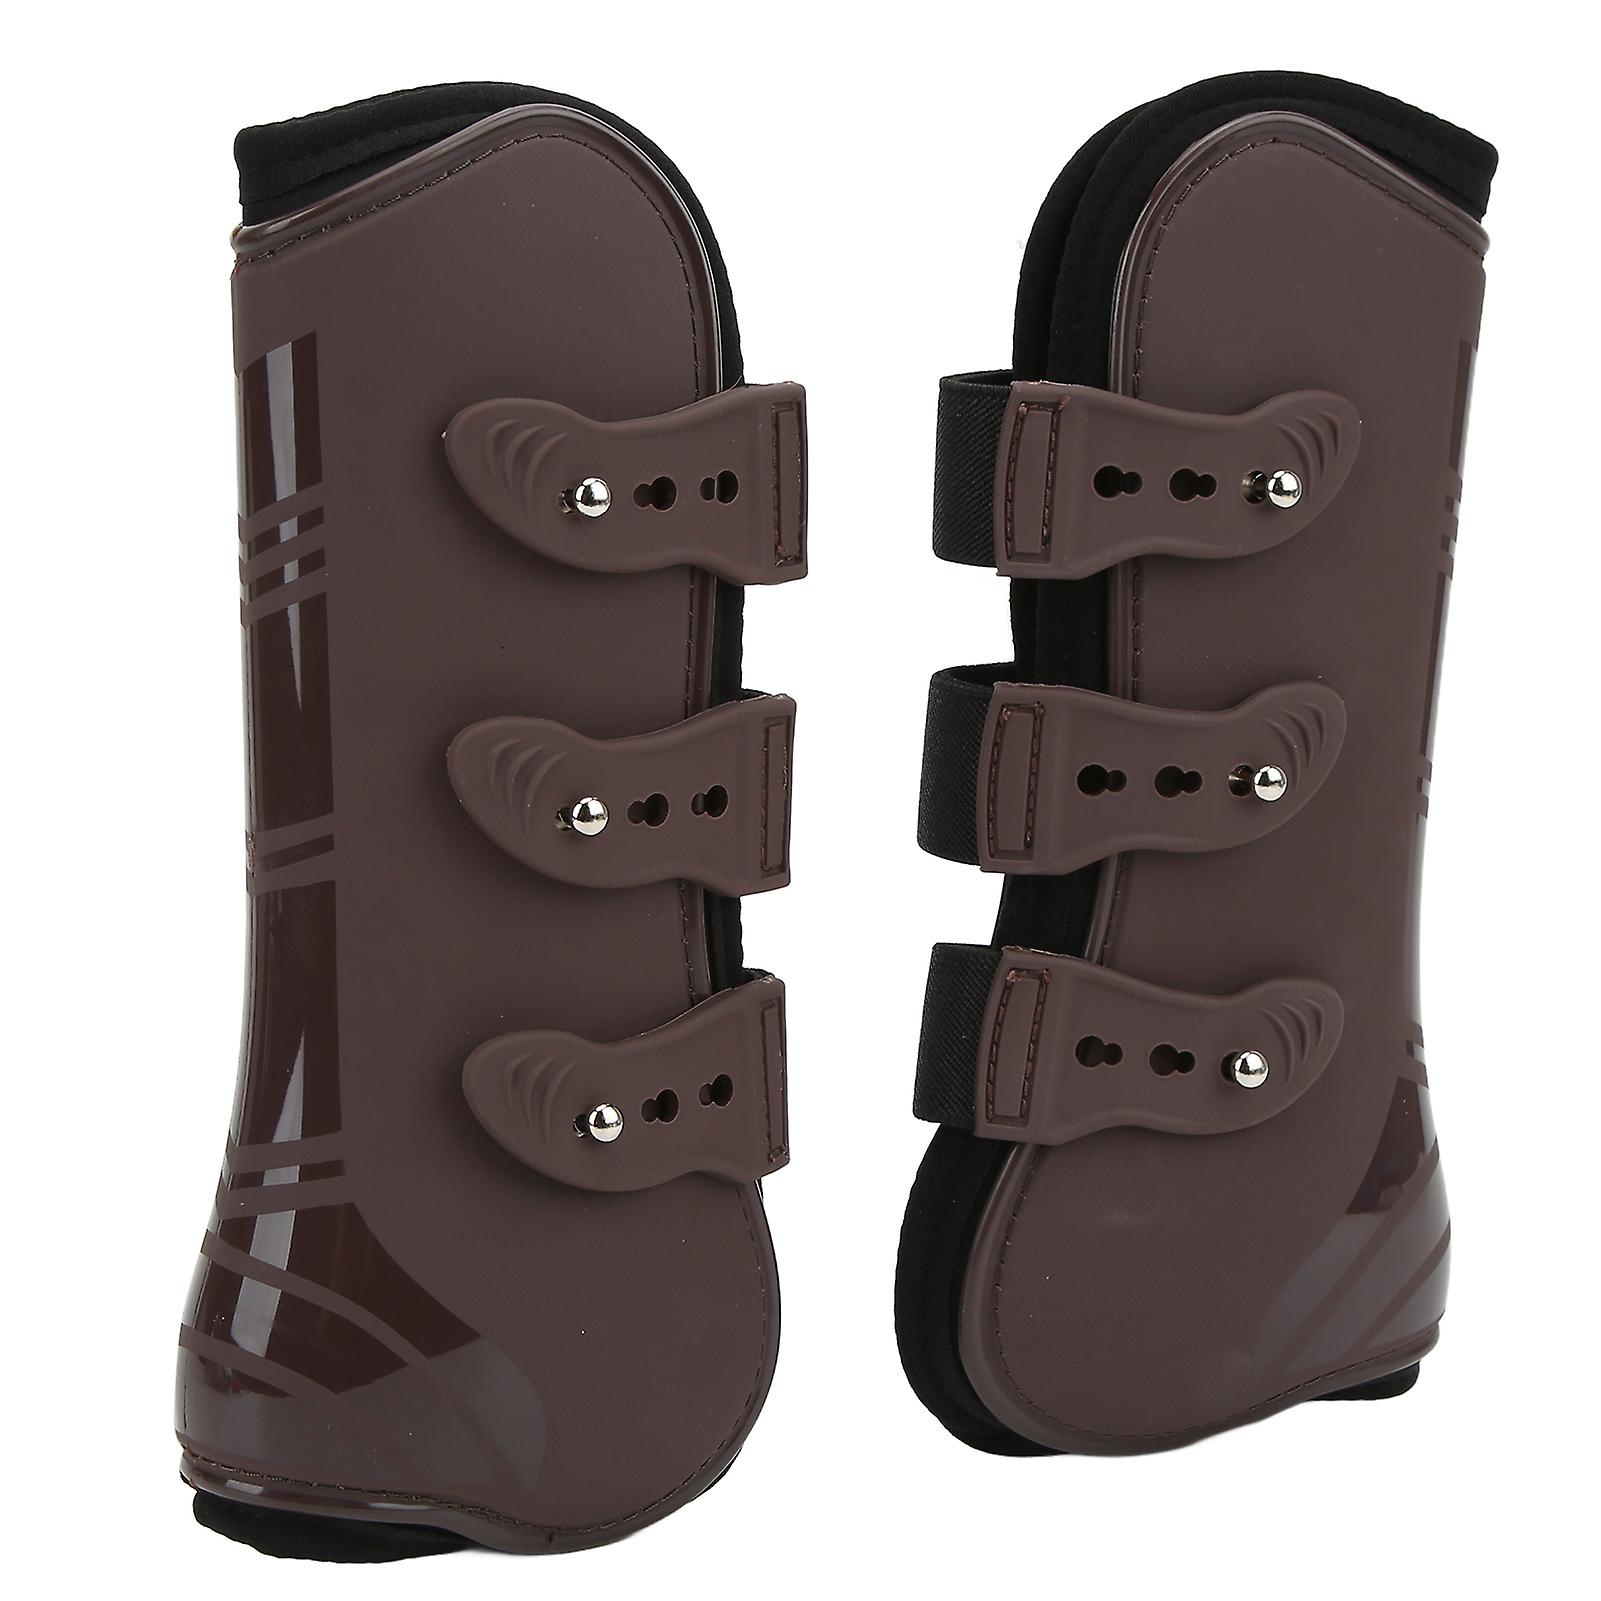 2pcs Horse Front Legs Guard Pu Neoprene Horse Leg Protective Boots For Riding Jumpingpair Of Brown Front Legs Xl